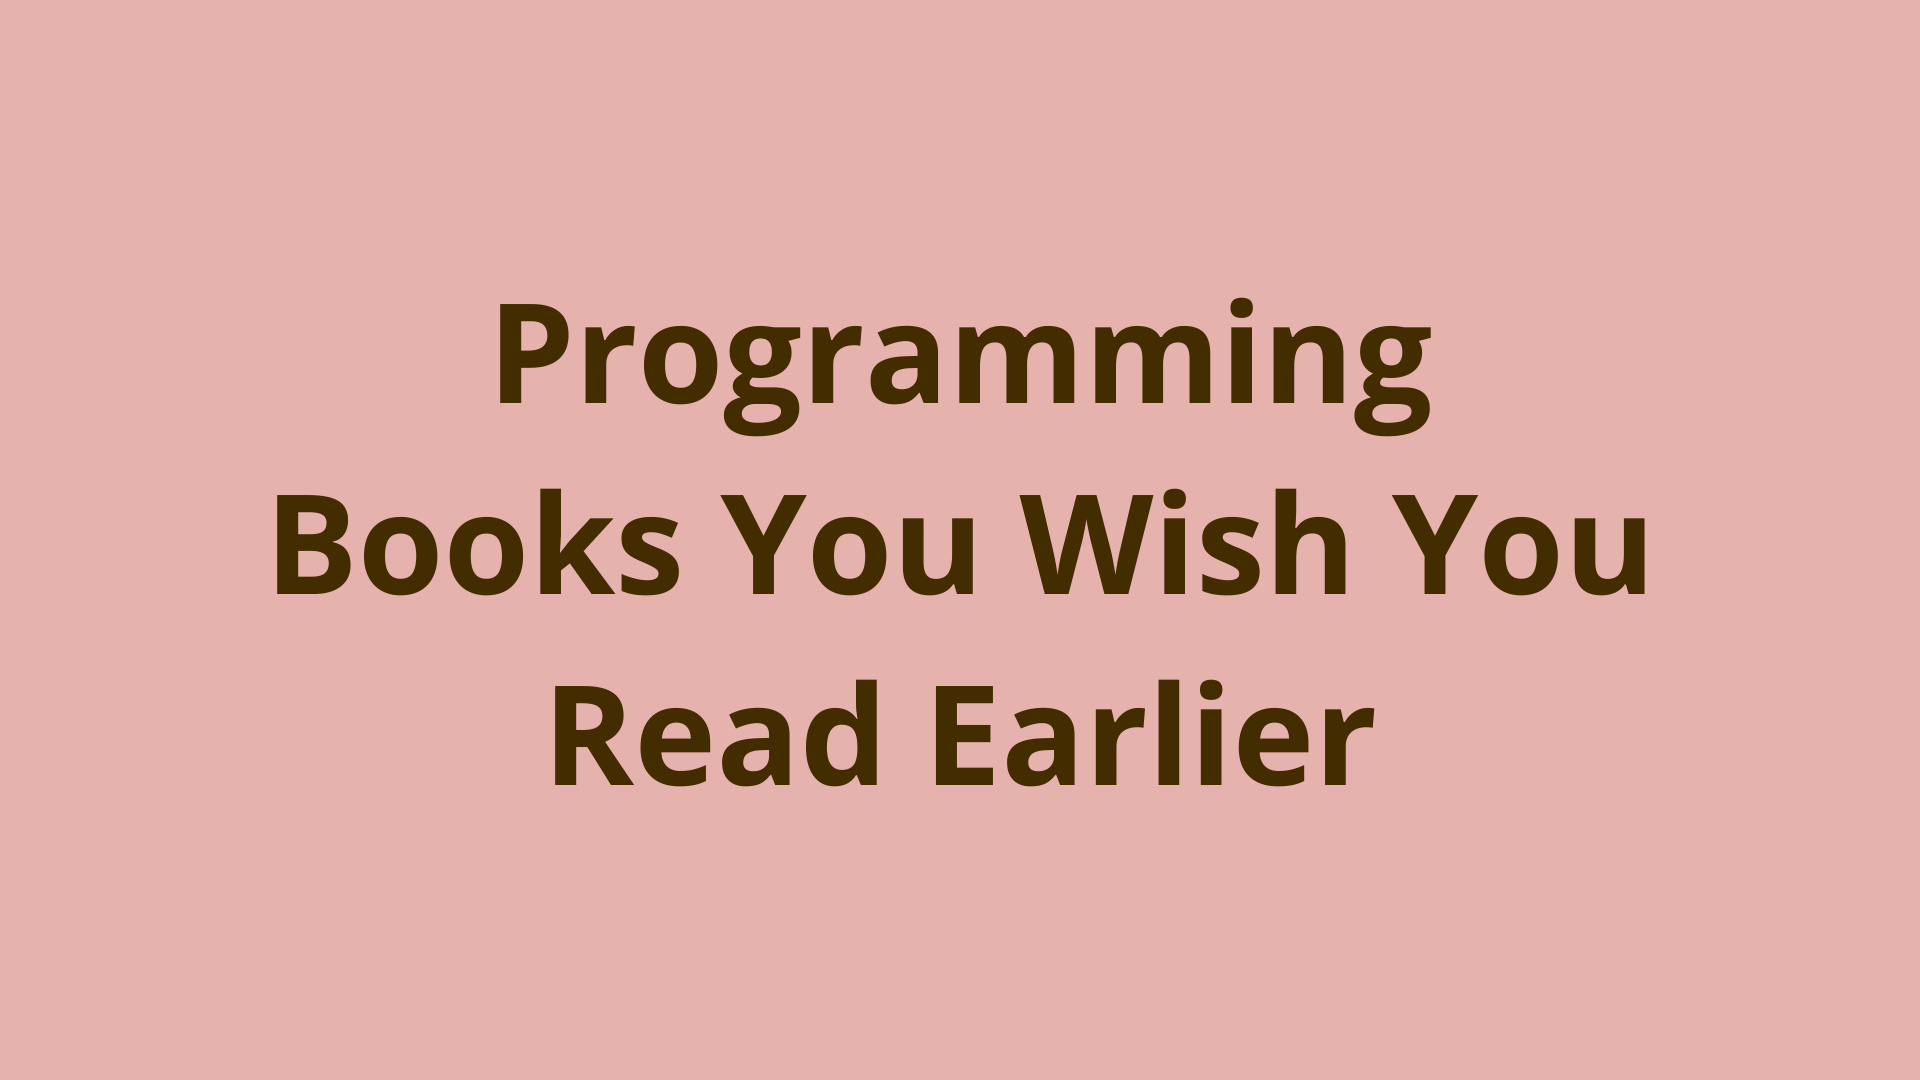 Image of Programming books you wish you read earlier